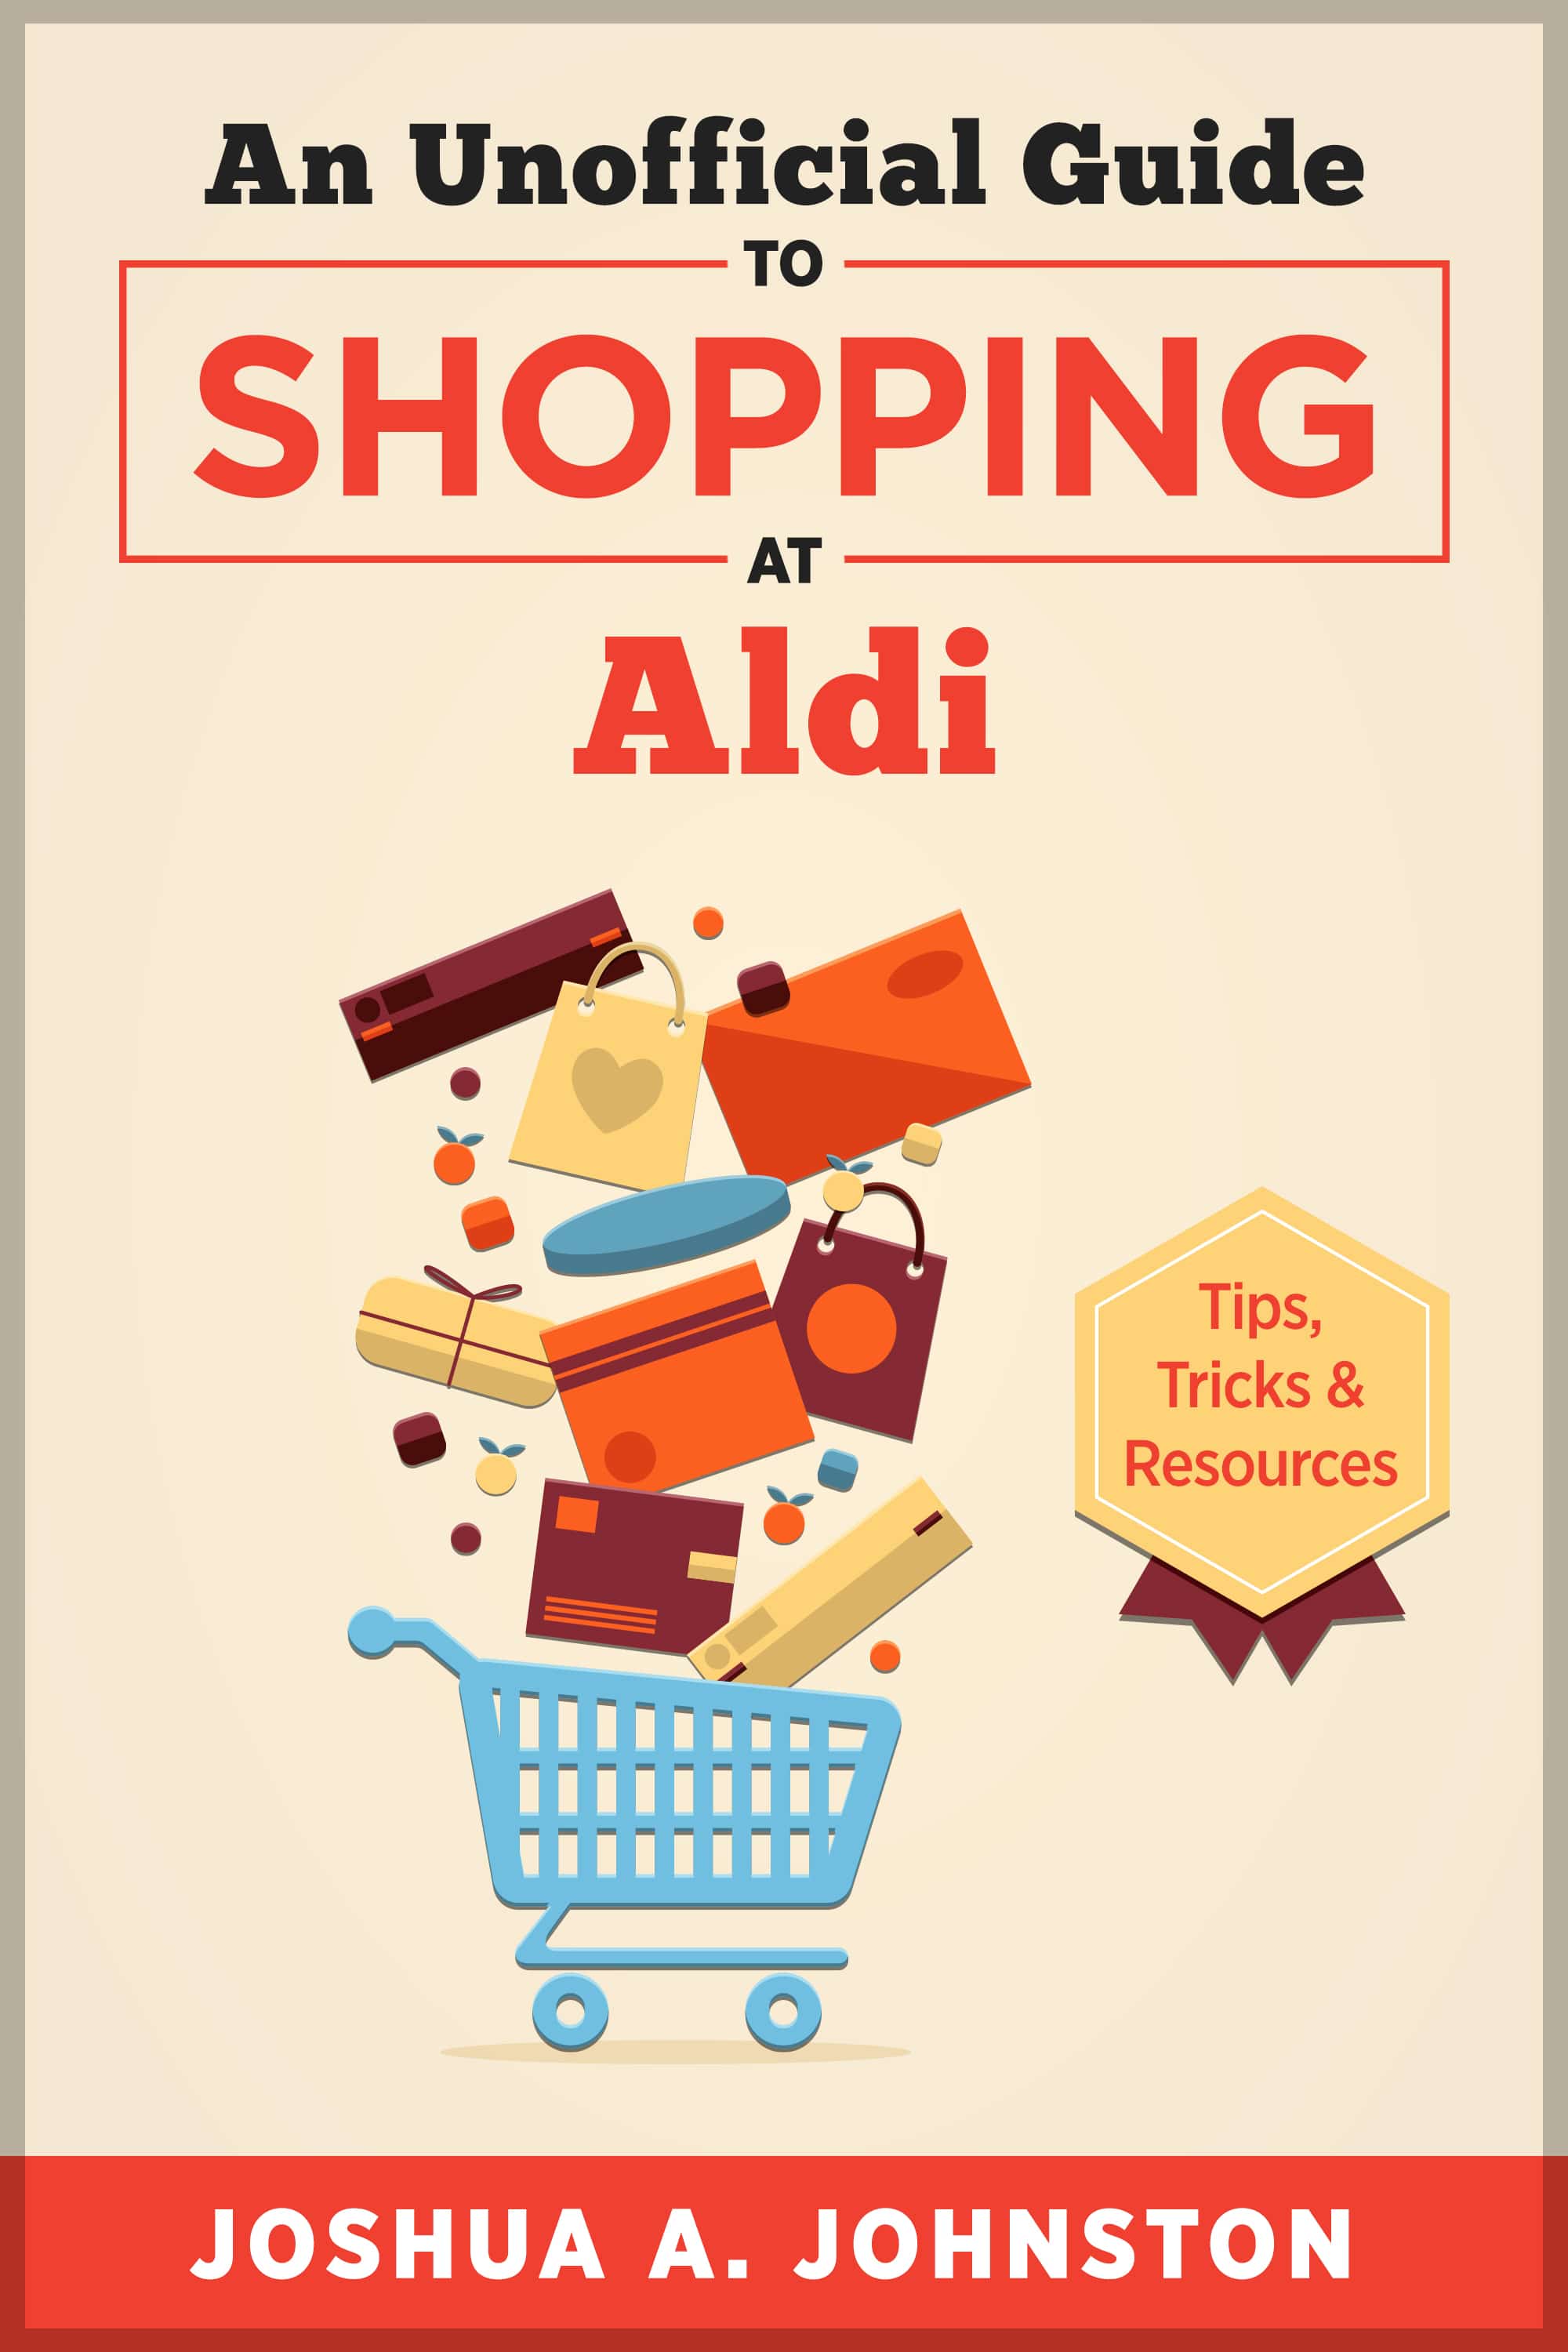 An Unofficial Guide to Shopping at Aldi